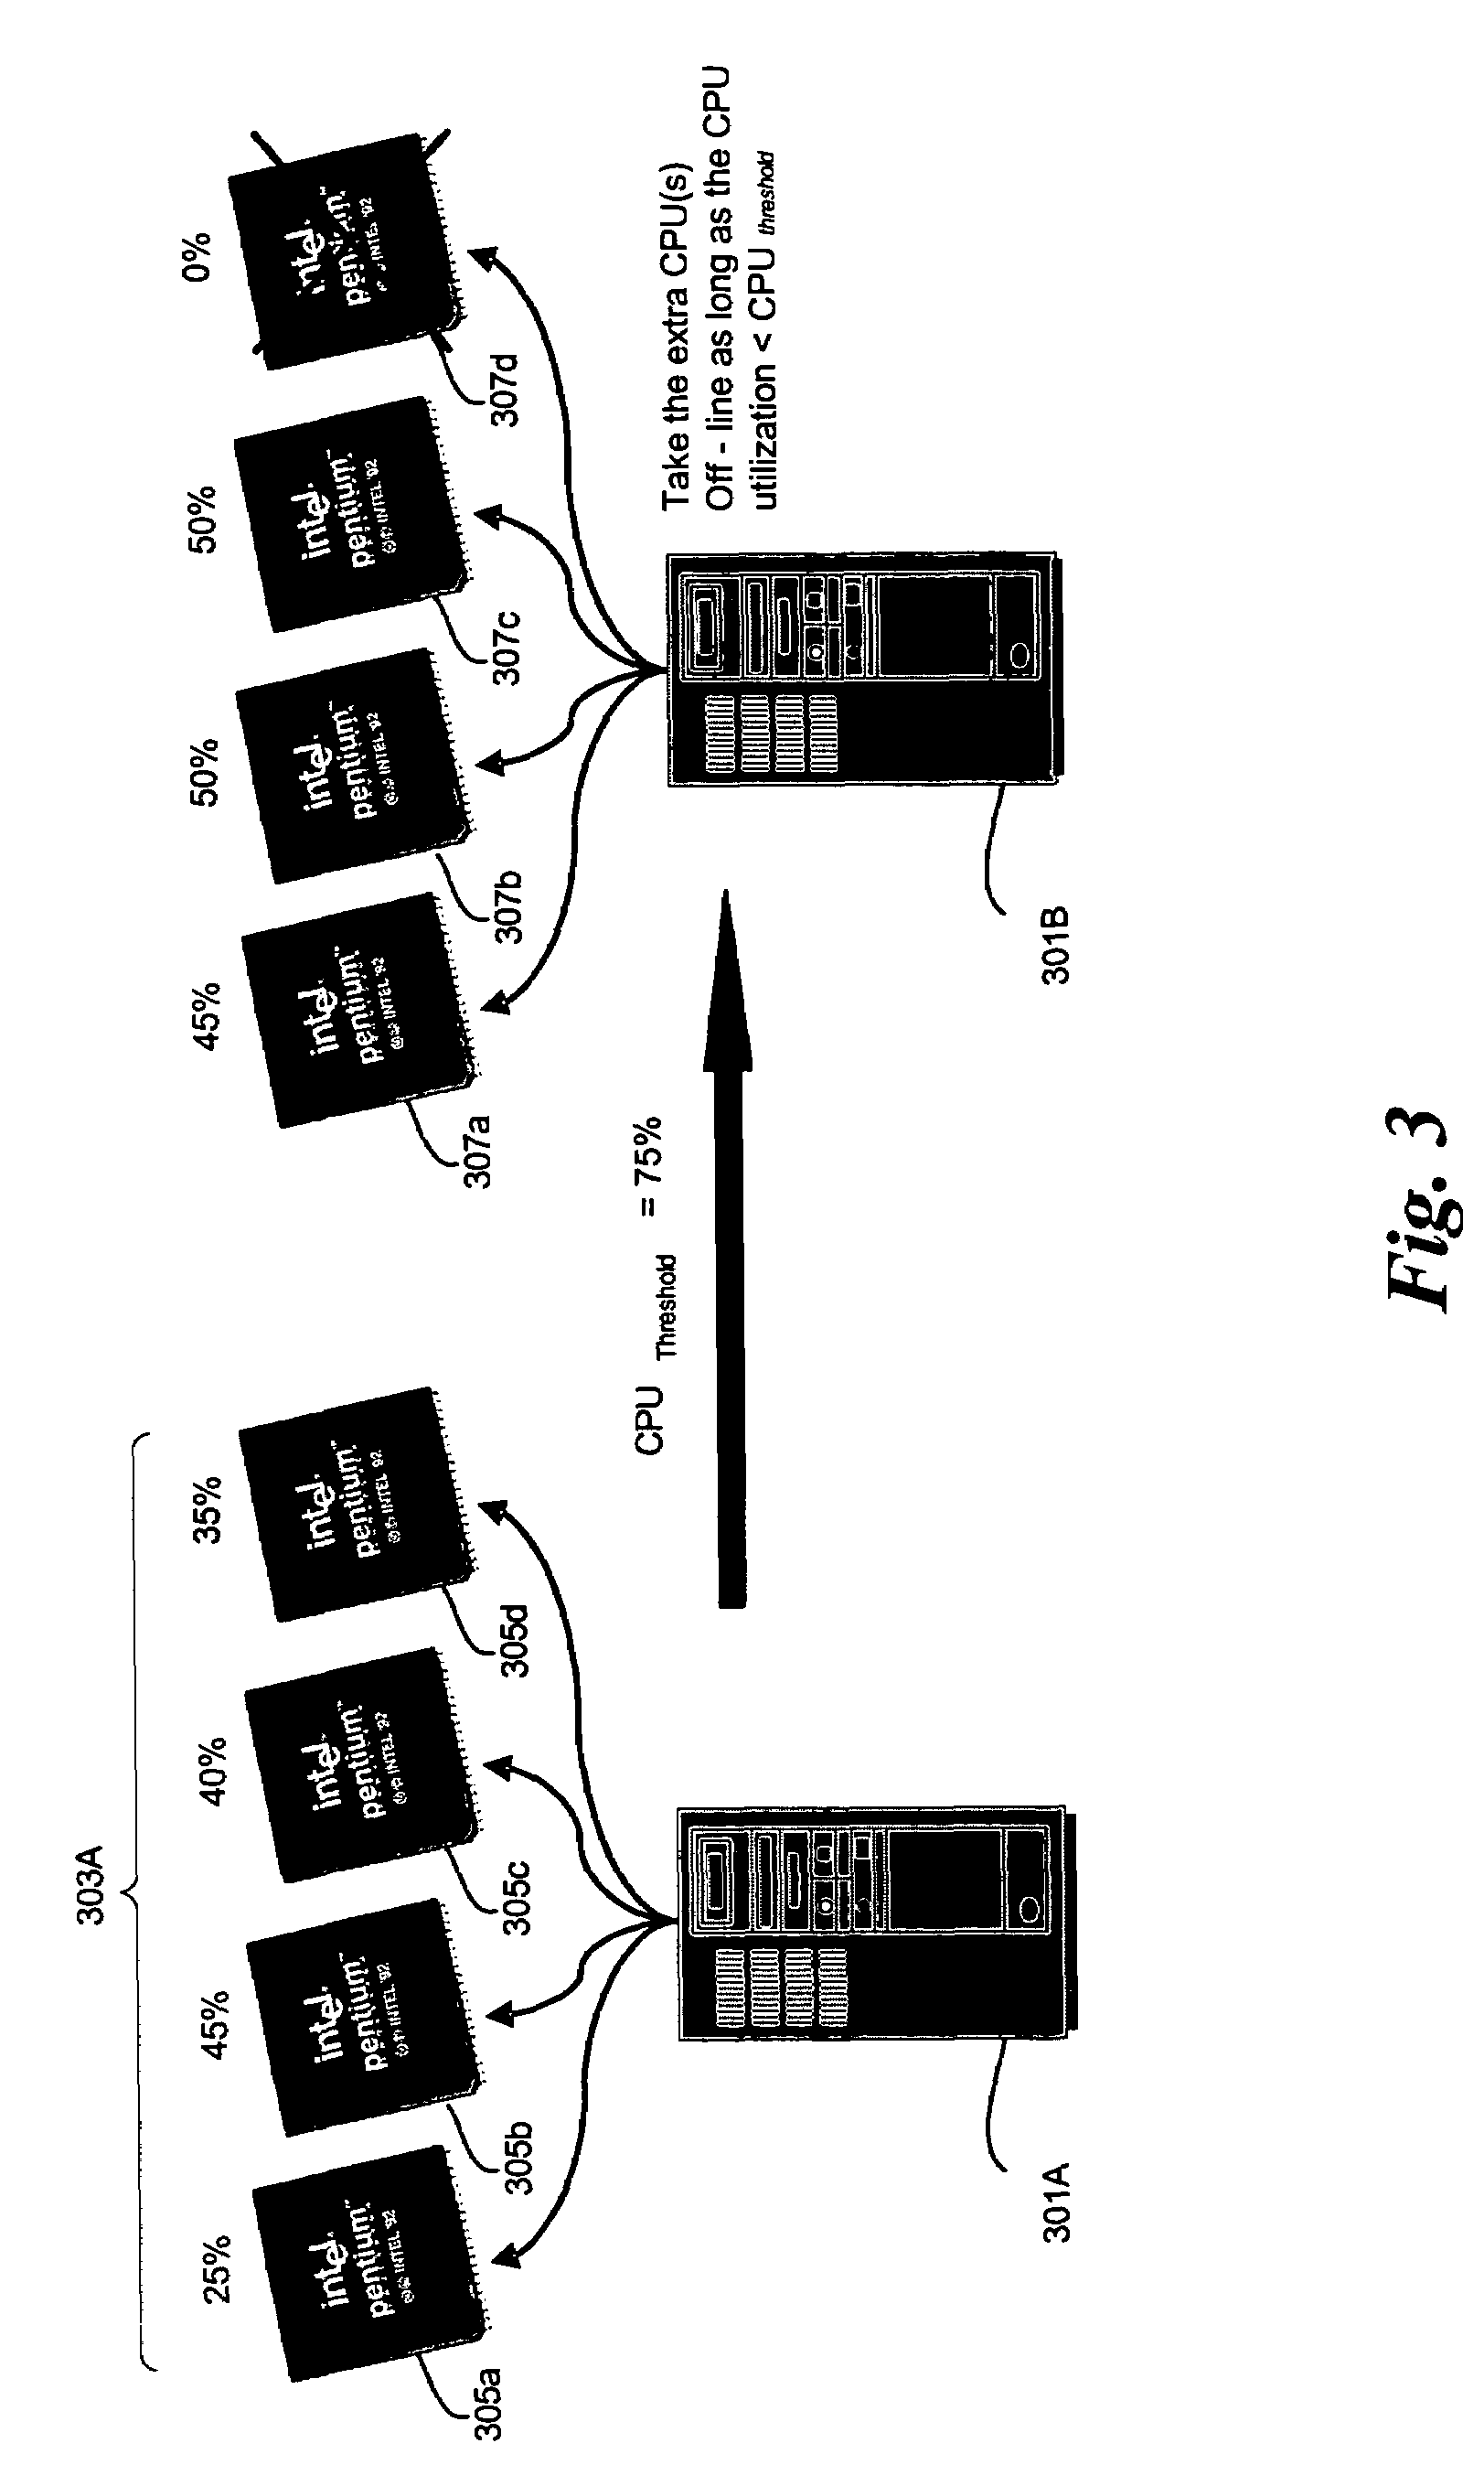 System and method to enable processor management policy in a multi-processor environment